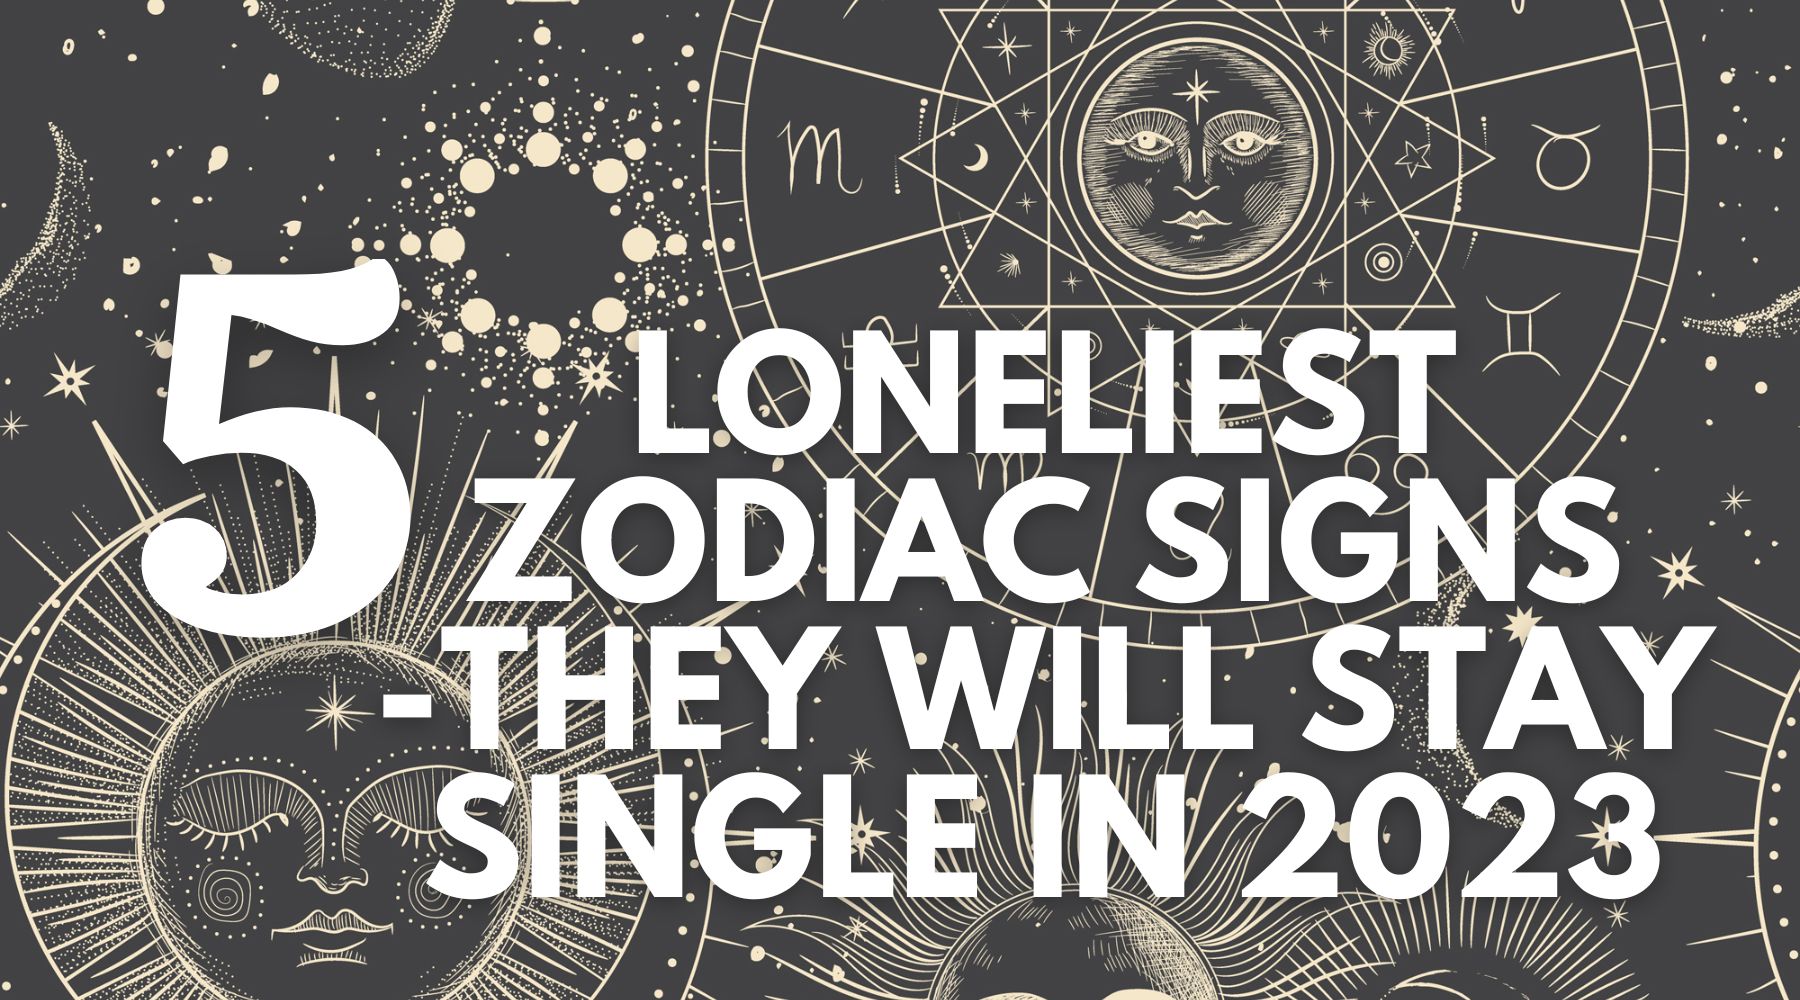 The 5 loneliest zodiac signs-Are you one of them?